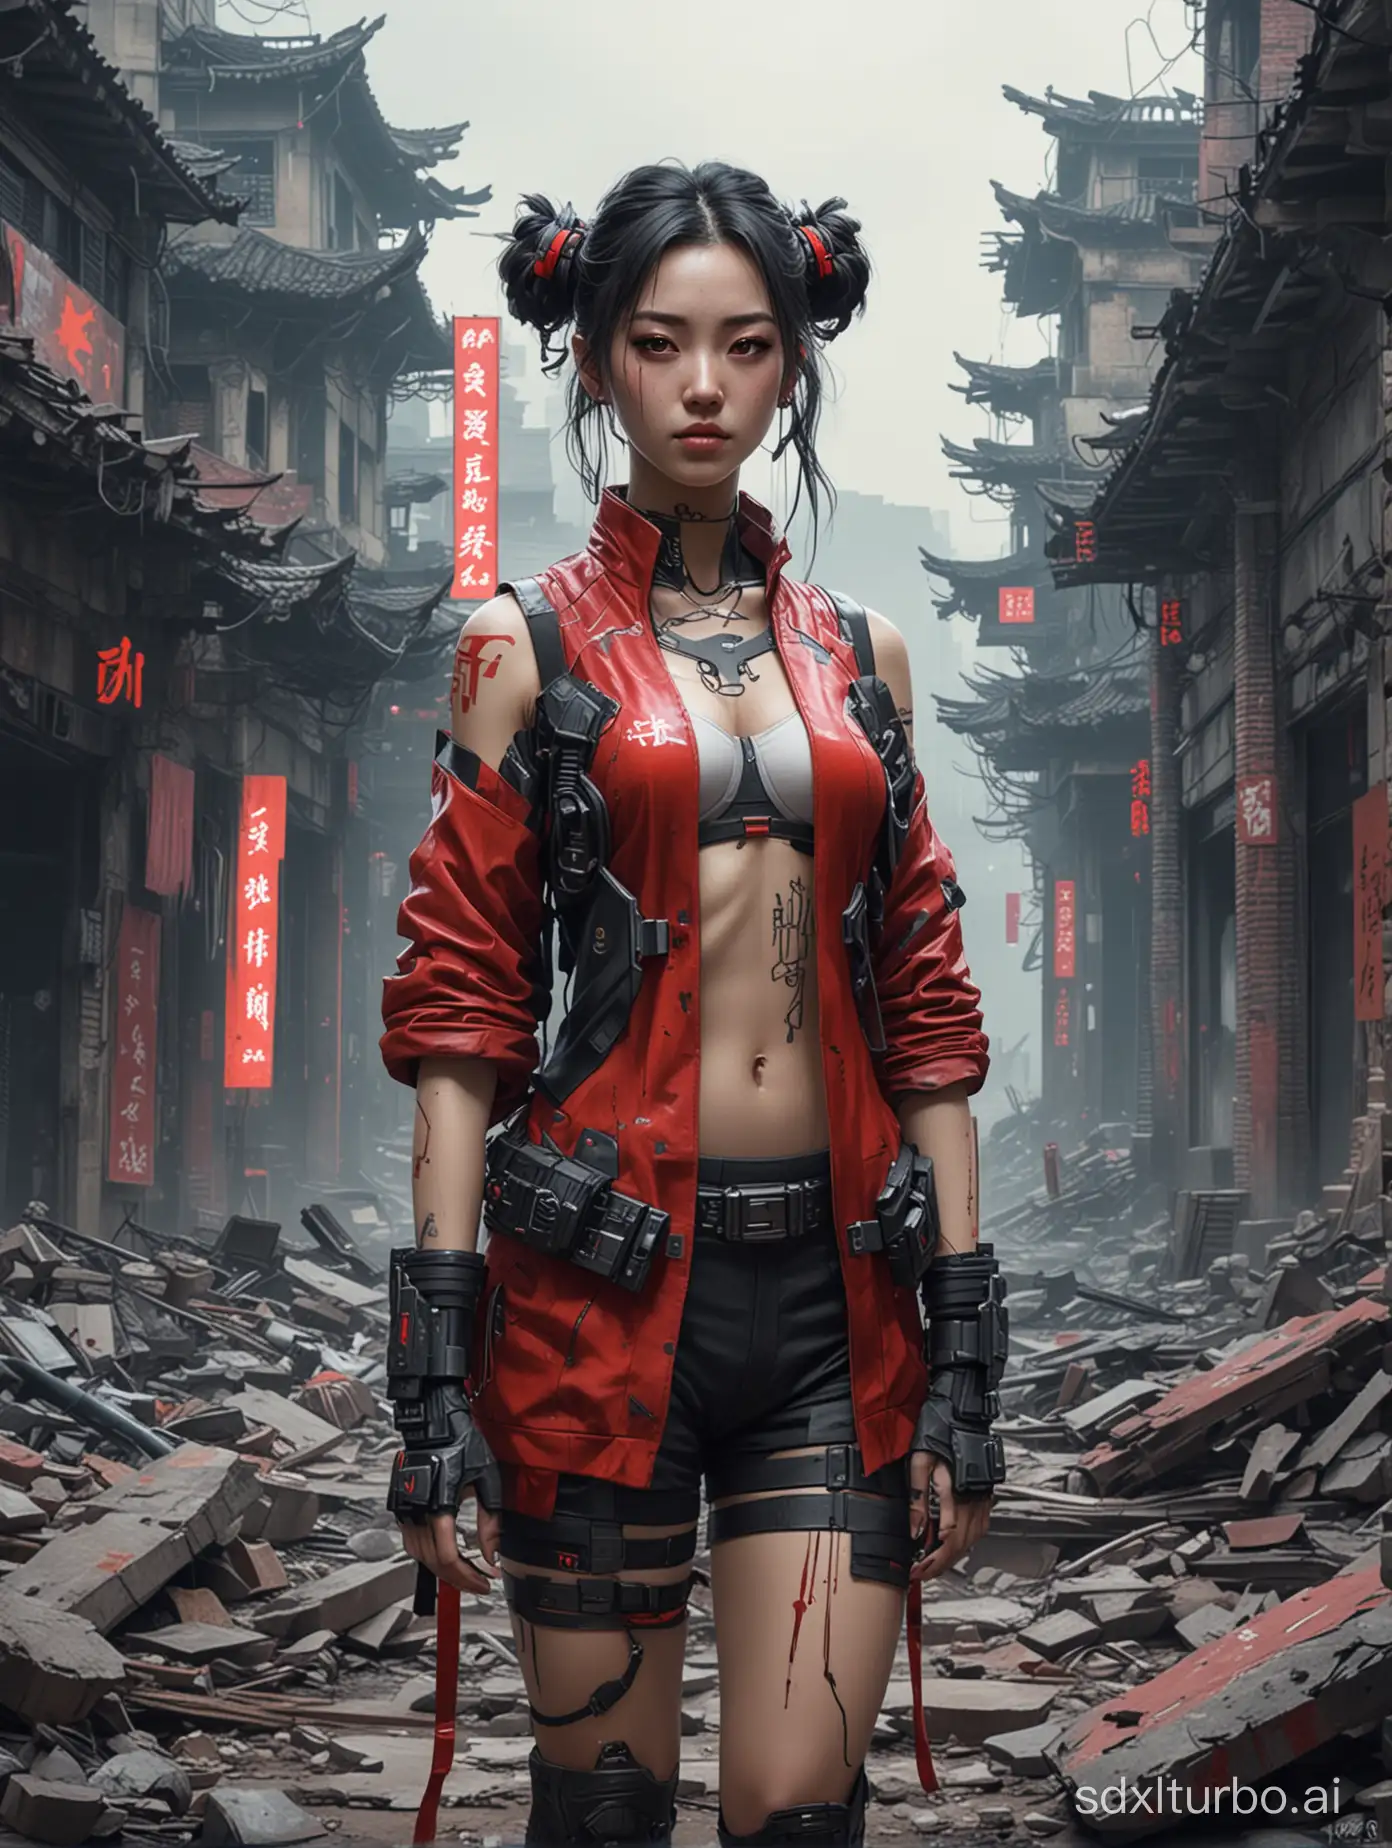 Digitized characters in cyberpunk style, applied in the ruins of the 816 project in Fuling, Chongqing. If it's a Chinese-style girl, the background should have elements of the metaverse, technology, and revolution, with a touch of red.